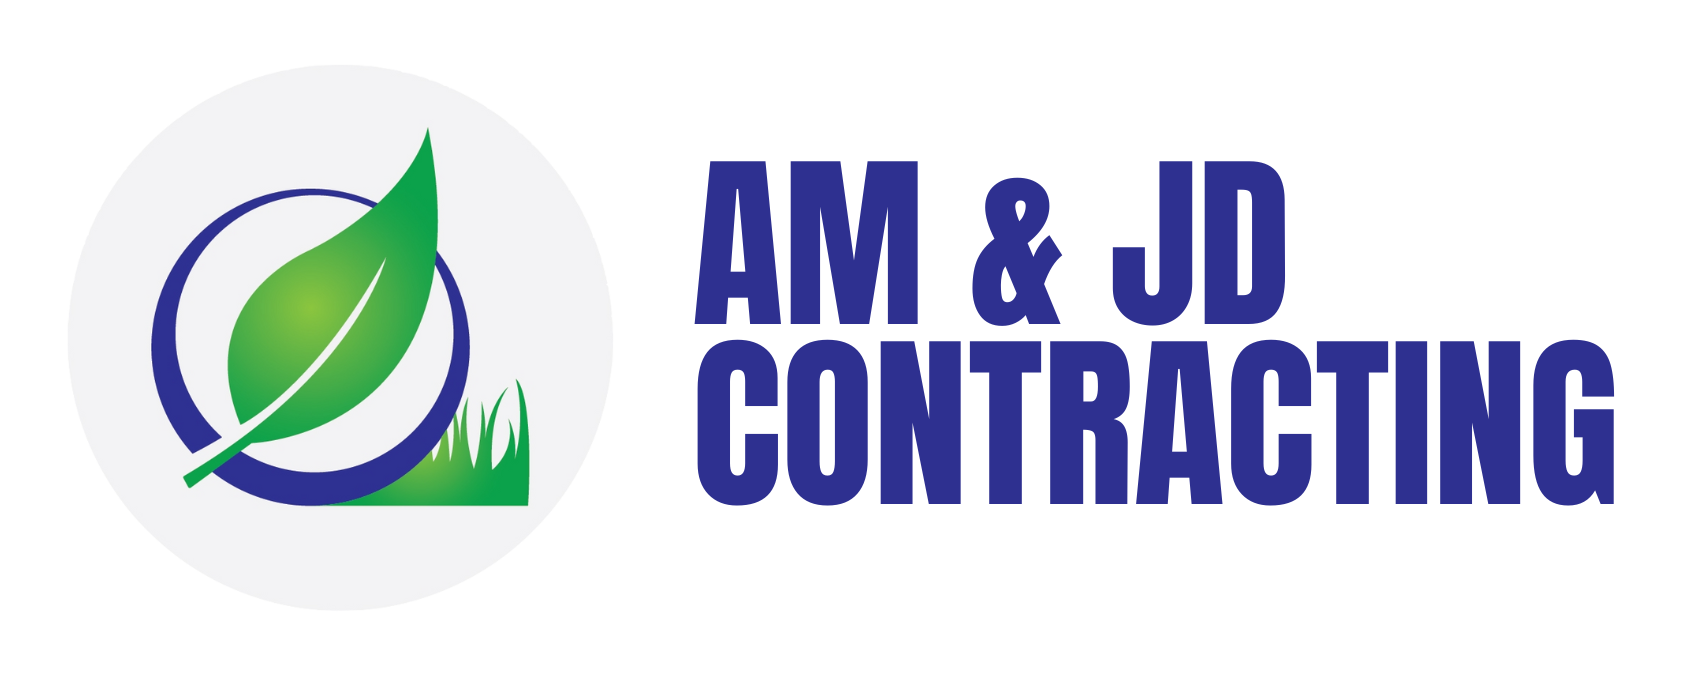 AM & JD Contracting Local Fencing Contractor in Muswellbrook